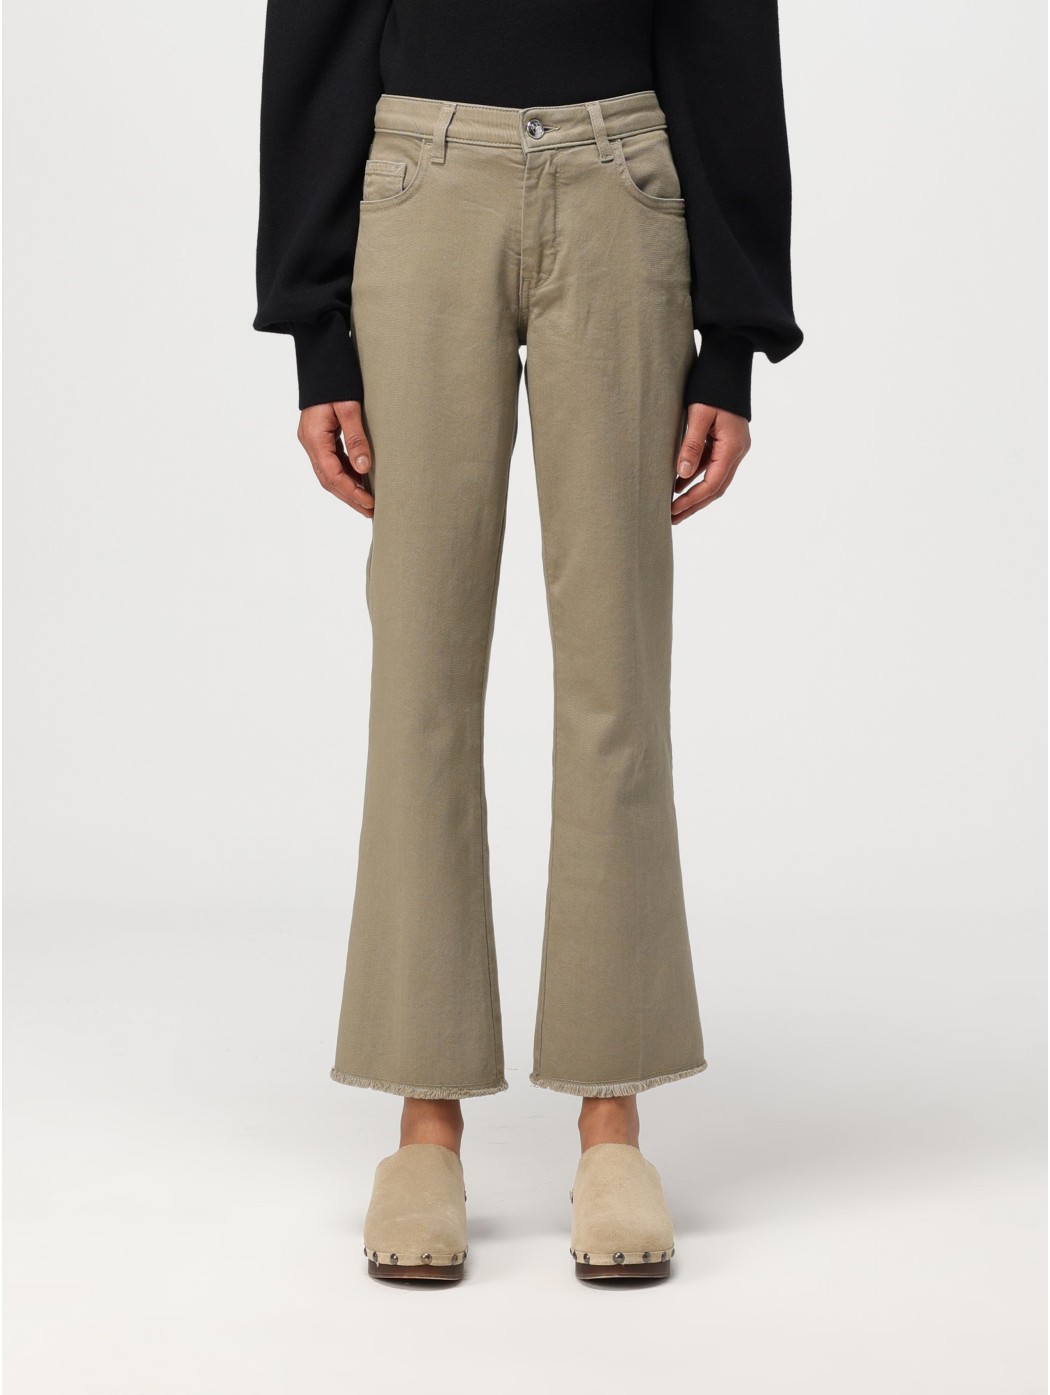 CROPPED PANT. T.CAPO F.DO...